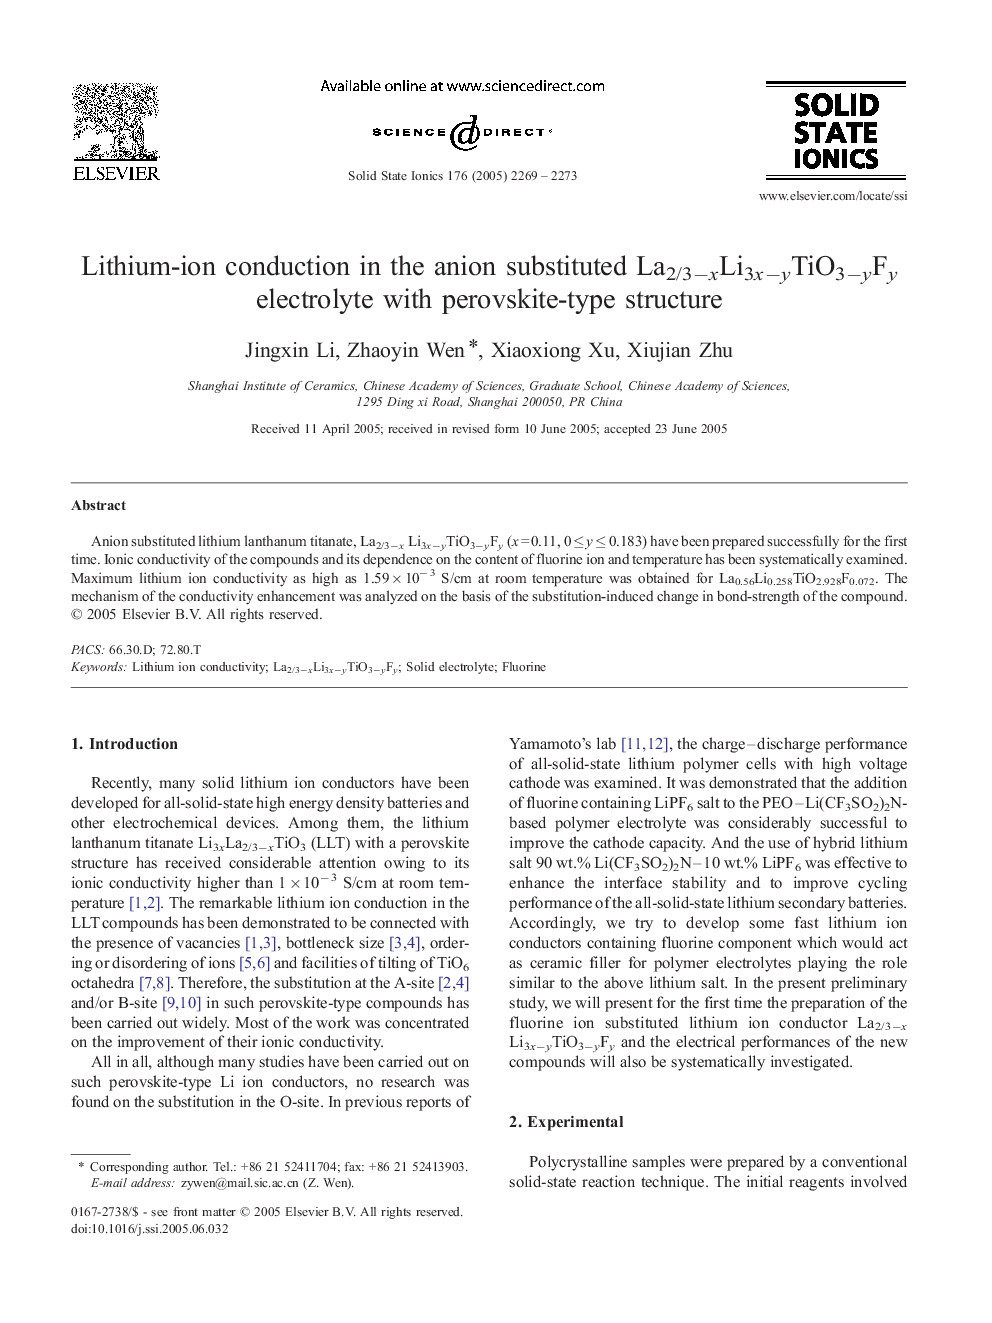 Lithium-ion conduction in the anion substituted La2/3−xLi3x−yTiO3−yFy electrolyte with perovskite-type structure